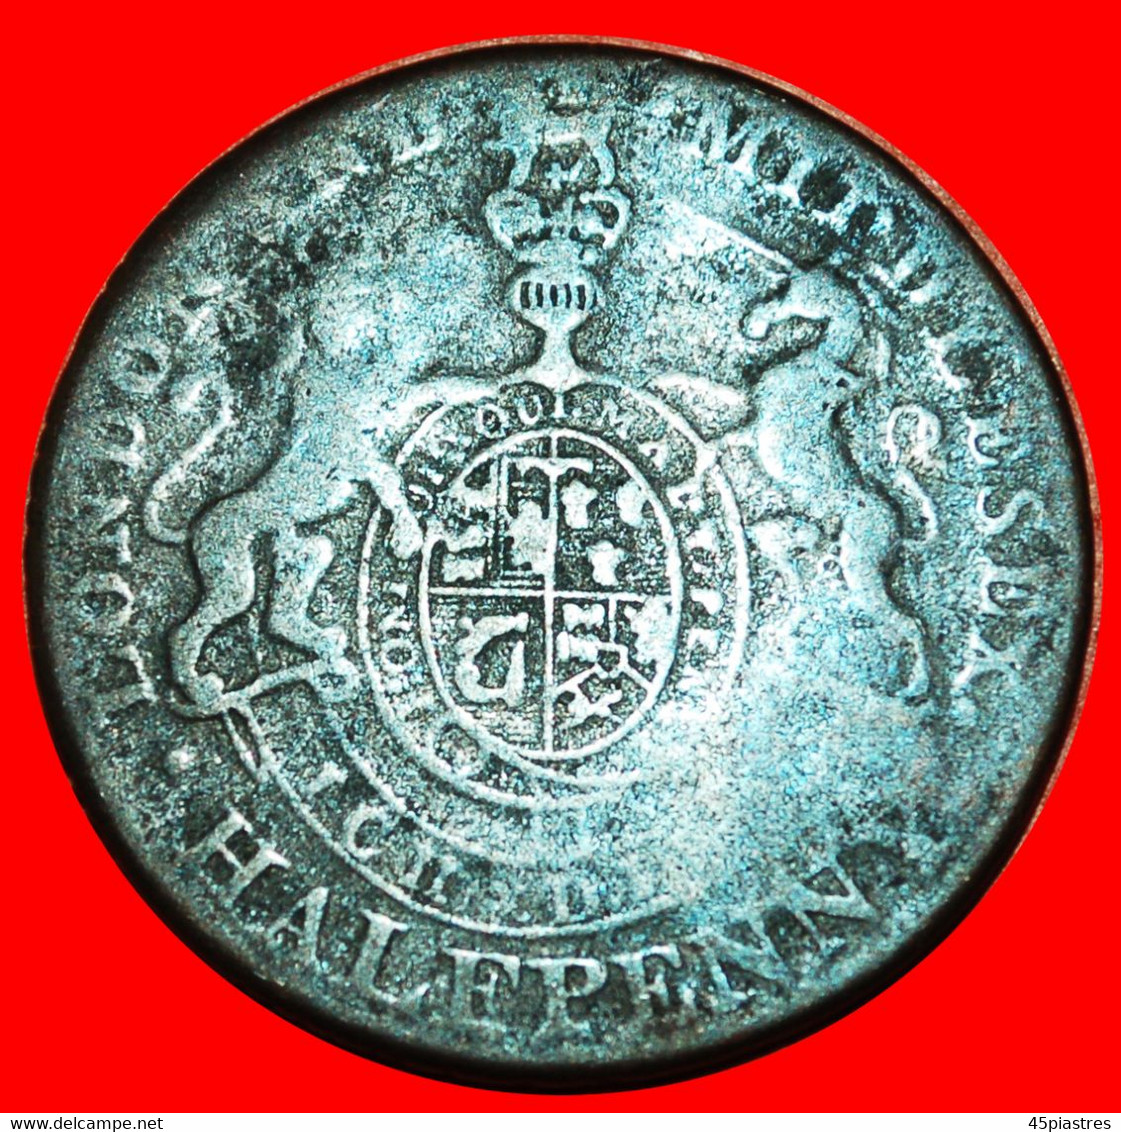 * CONDER PENNY: IRELAND And GREAT BRITAIN ★ HALFPENNY (1787-1797) GEO PRINCE OF WALES! LOW START ★ NO RESERVE! - Maundy Sets  & Conmemorativas